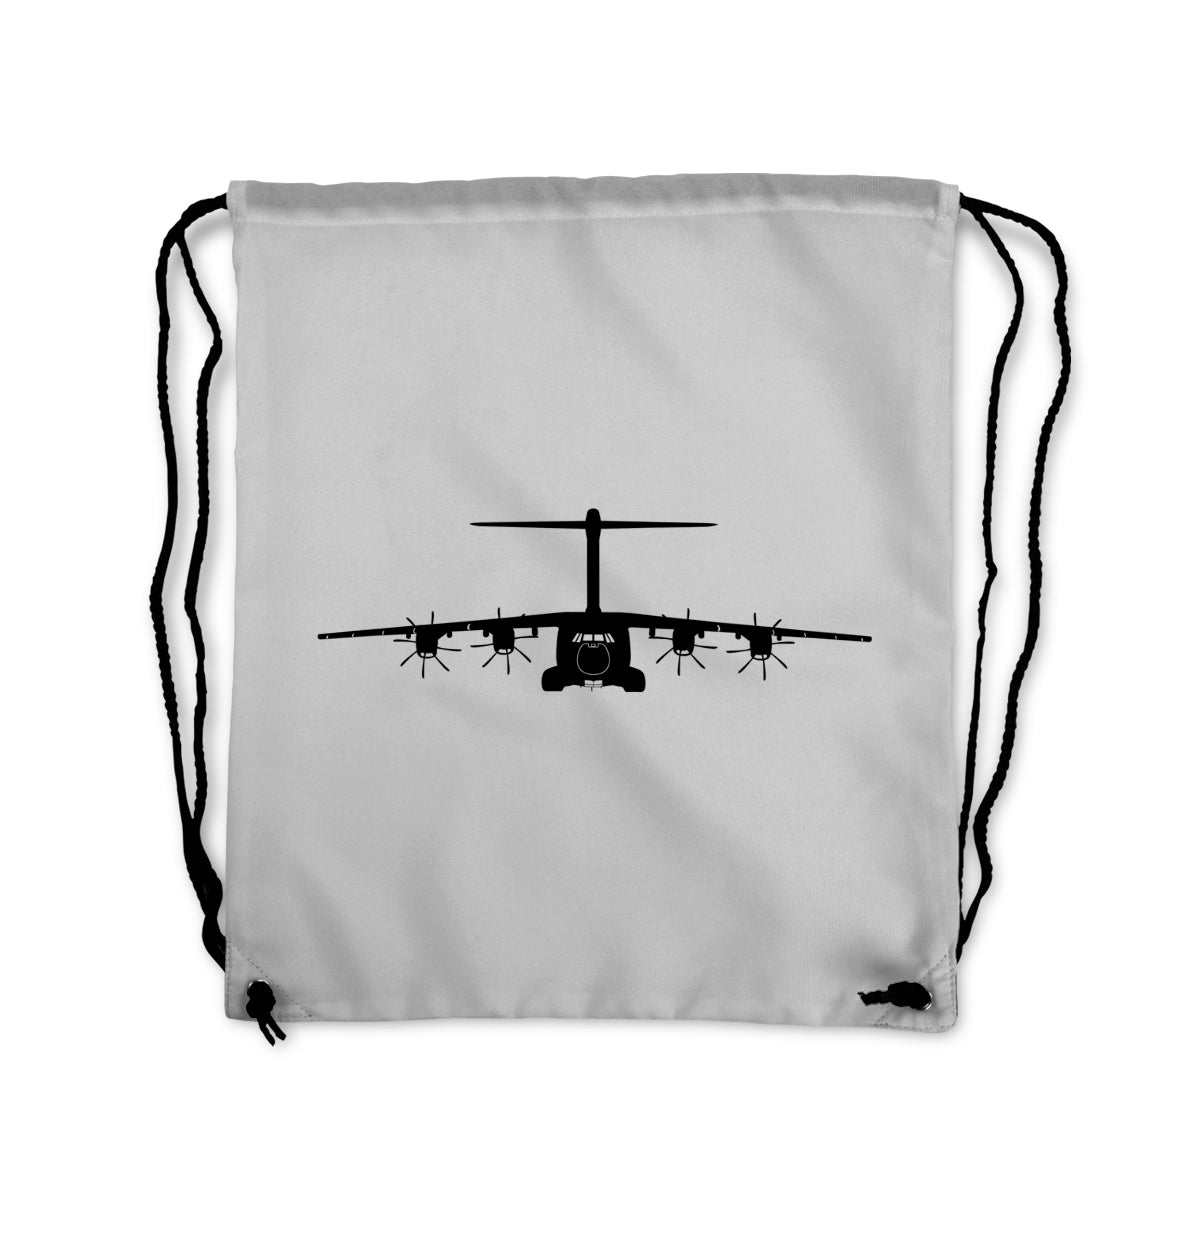 Airbus A400M Silhouette Designed Drawstring Bags